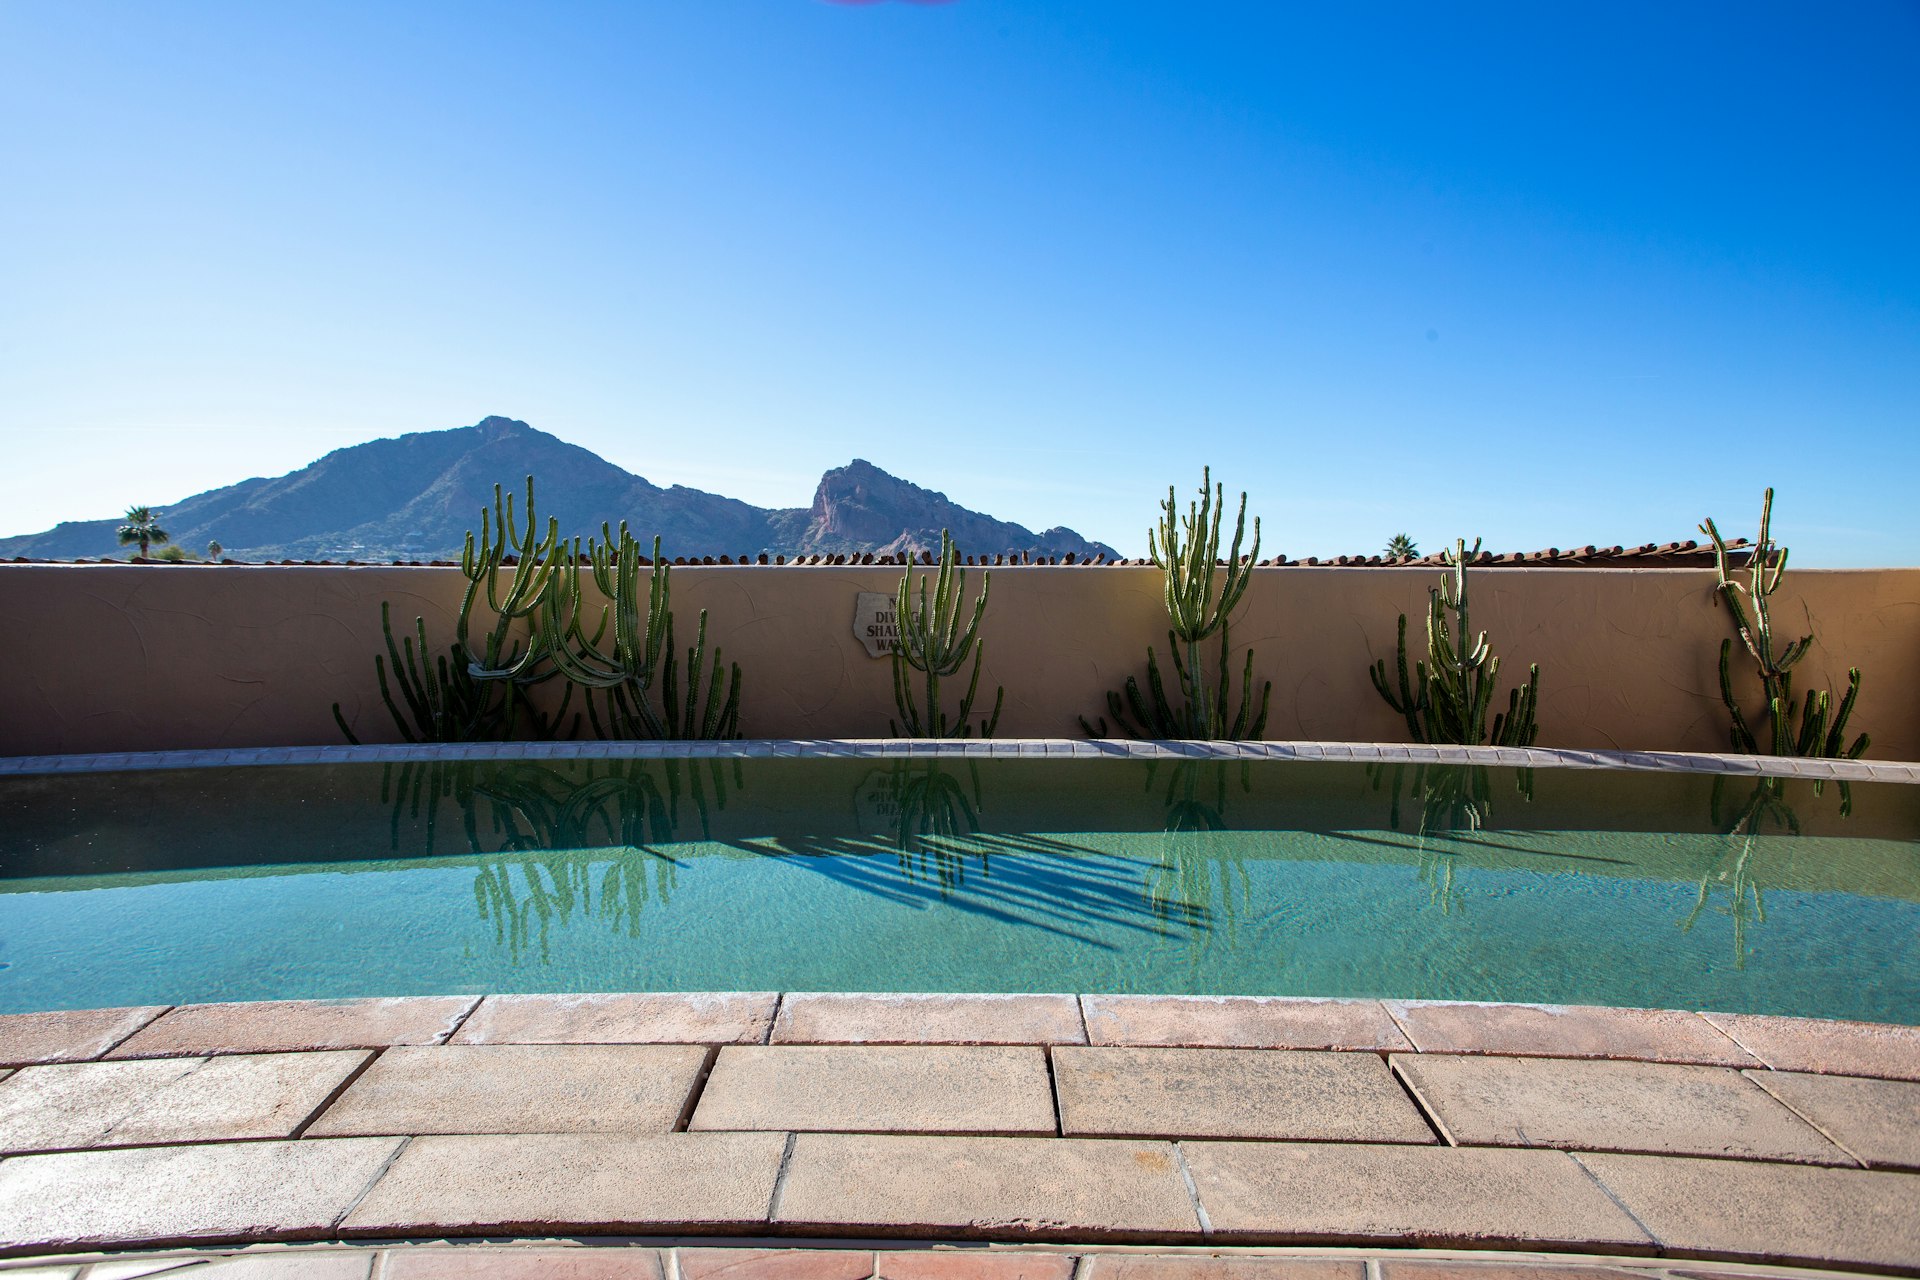 A pool along an adobe-style wall lined with cacti